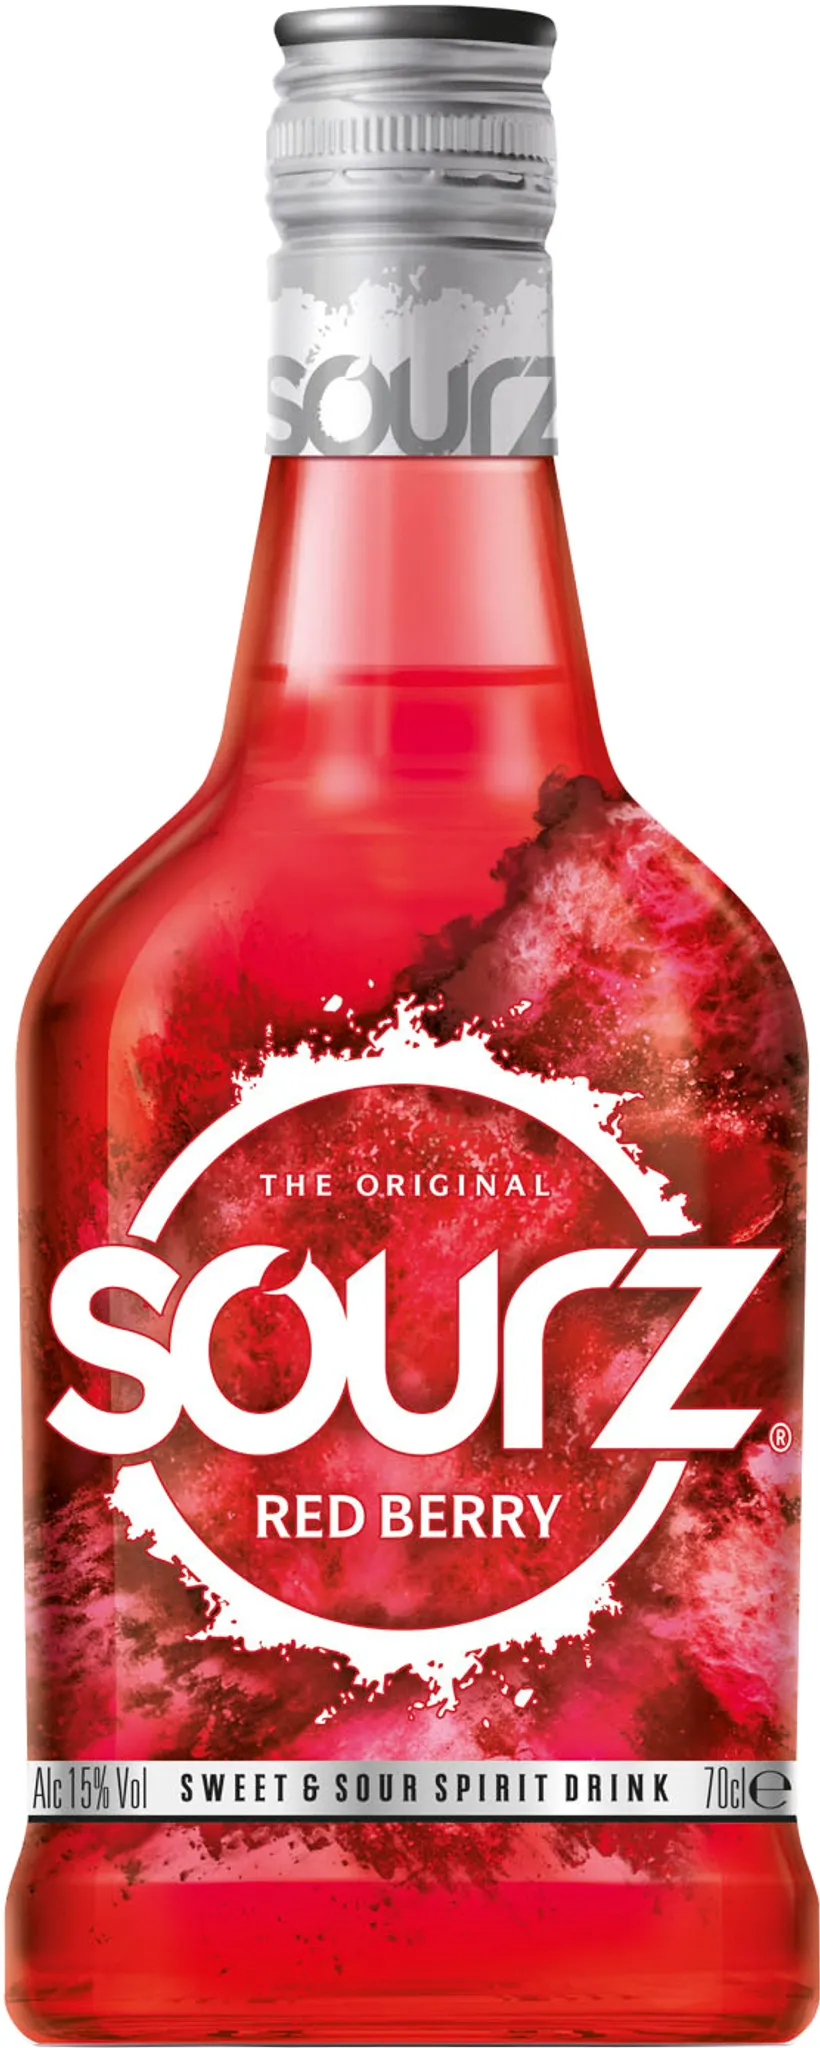 The Sour Red and Original Sourz Berry Sweet